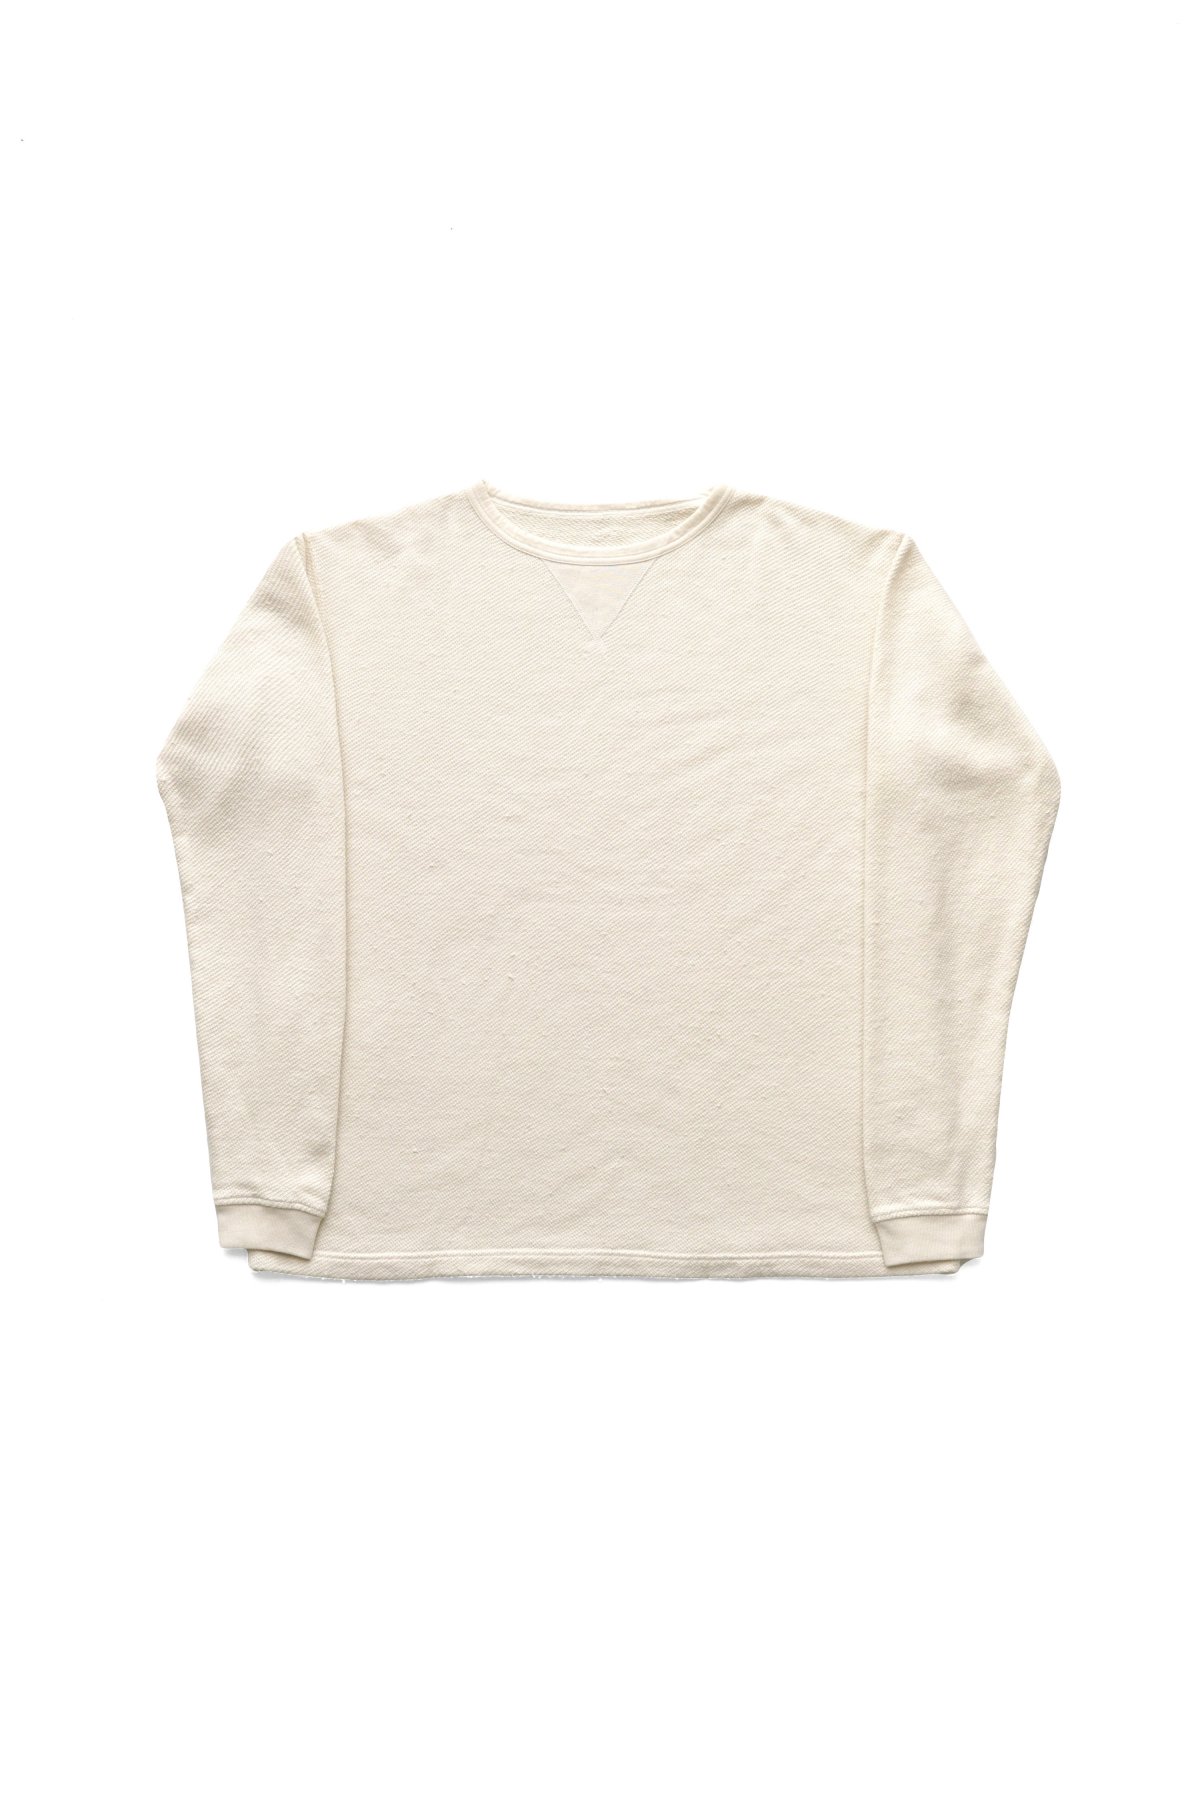 Porter Classic - FRENCH THERMAL CREWNECK - WHITE ポーター 